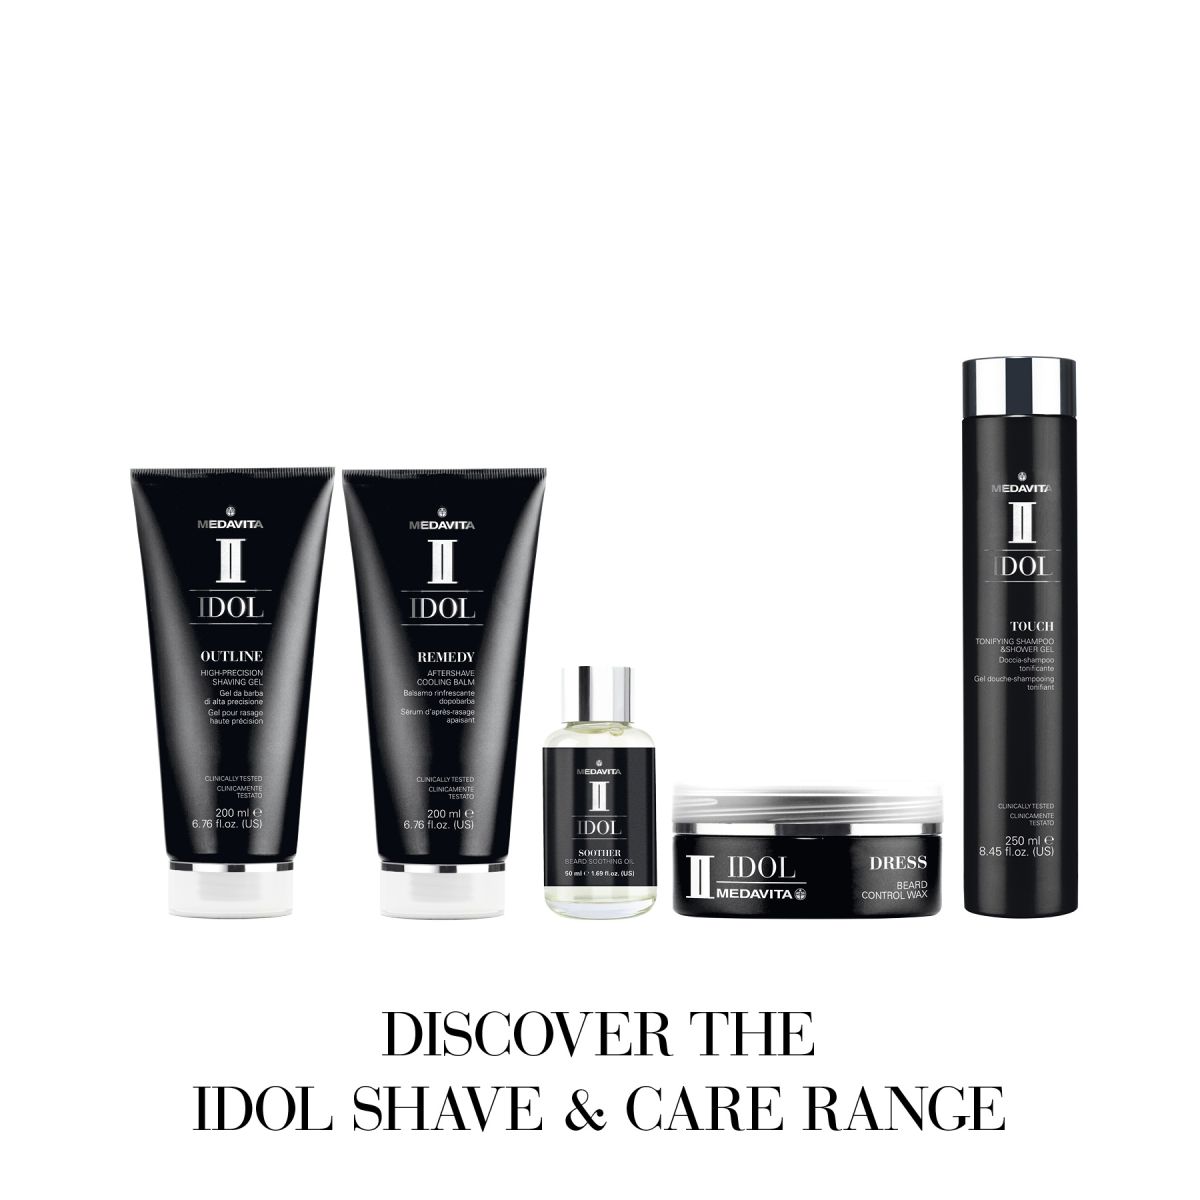 Idol Man Shave & Care - Home Remedy – Refreshing Aftershave Balm